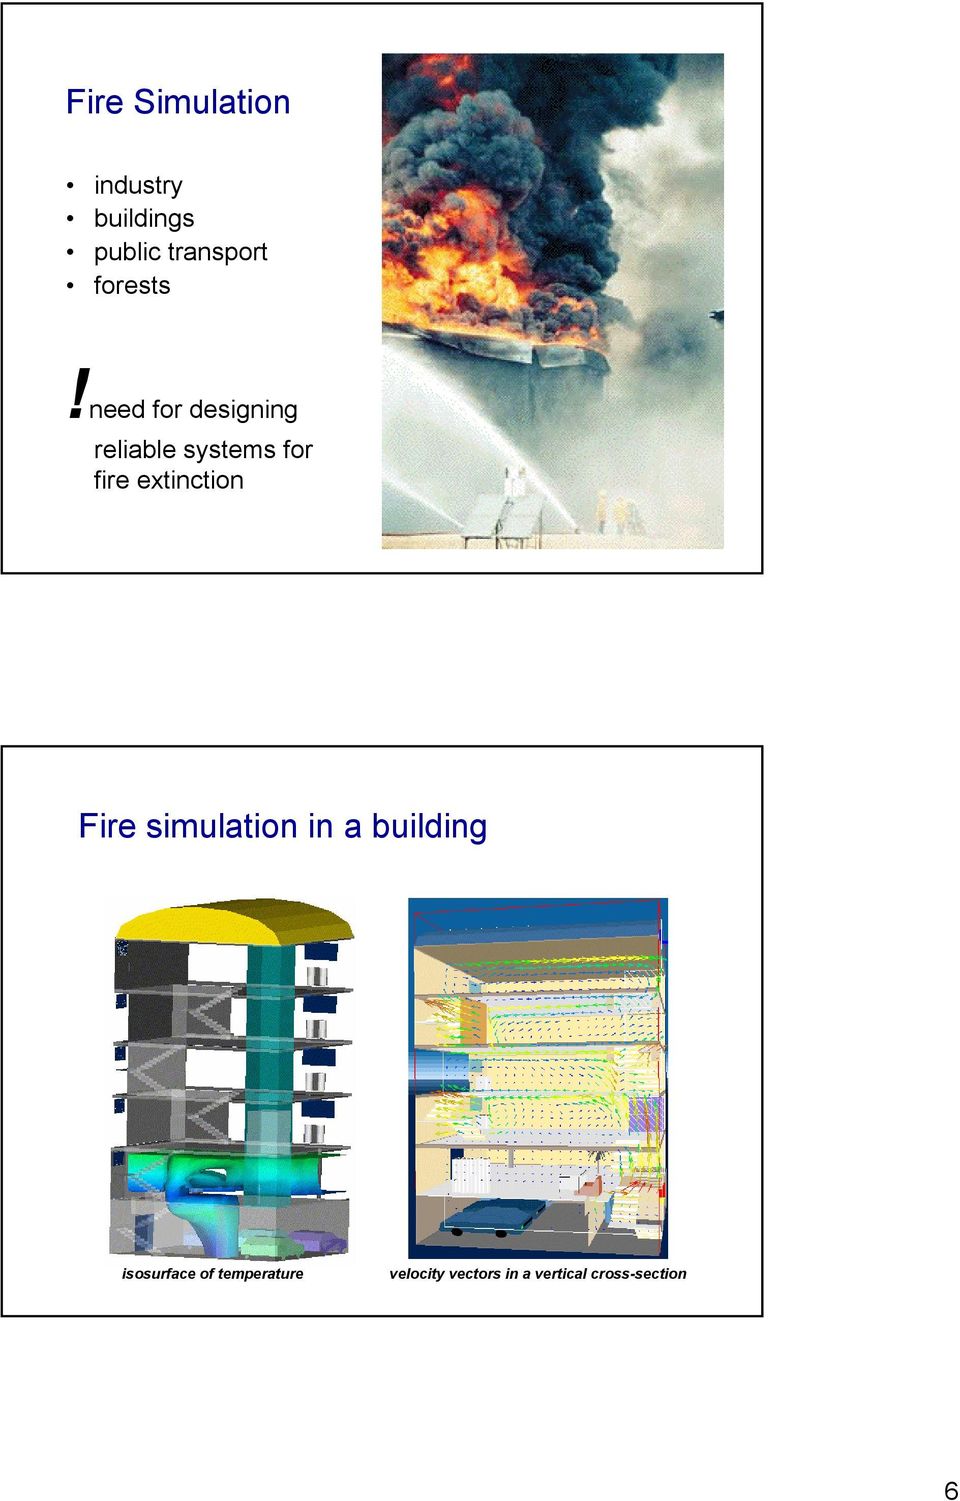 need for designing reliable systems for fire